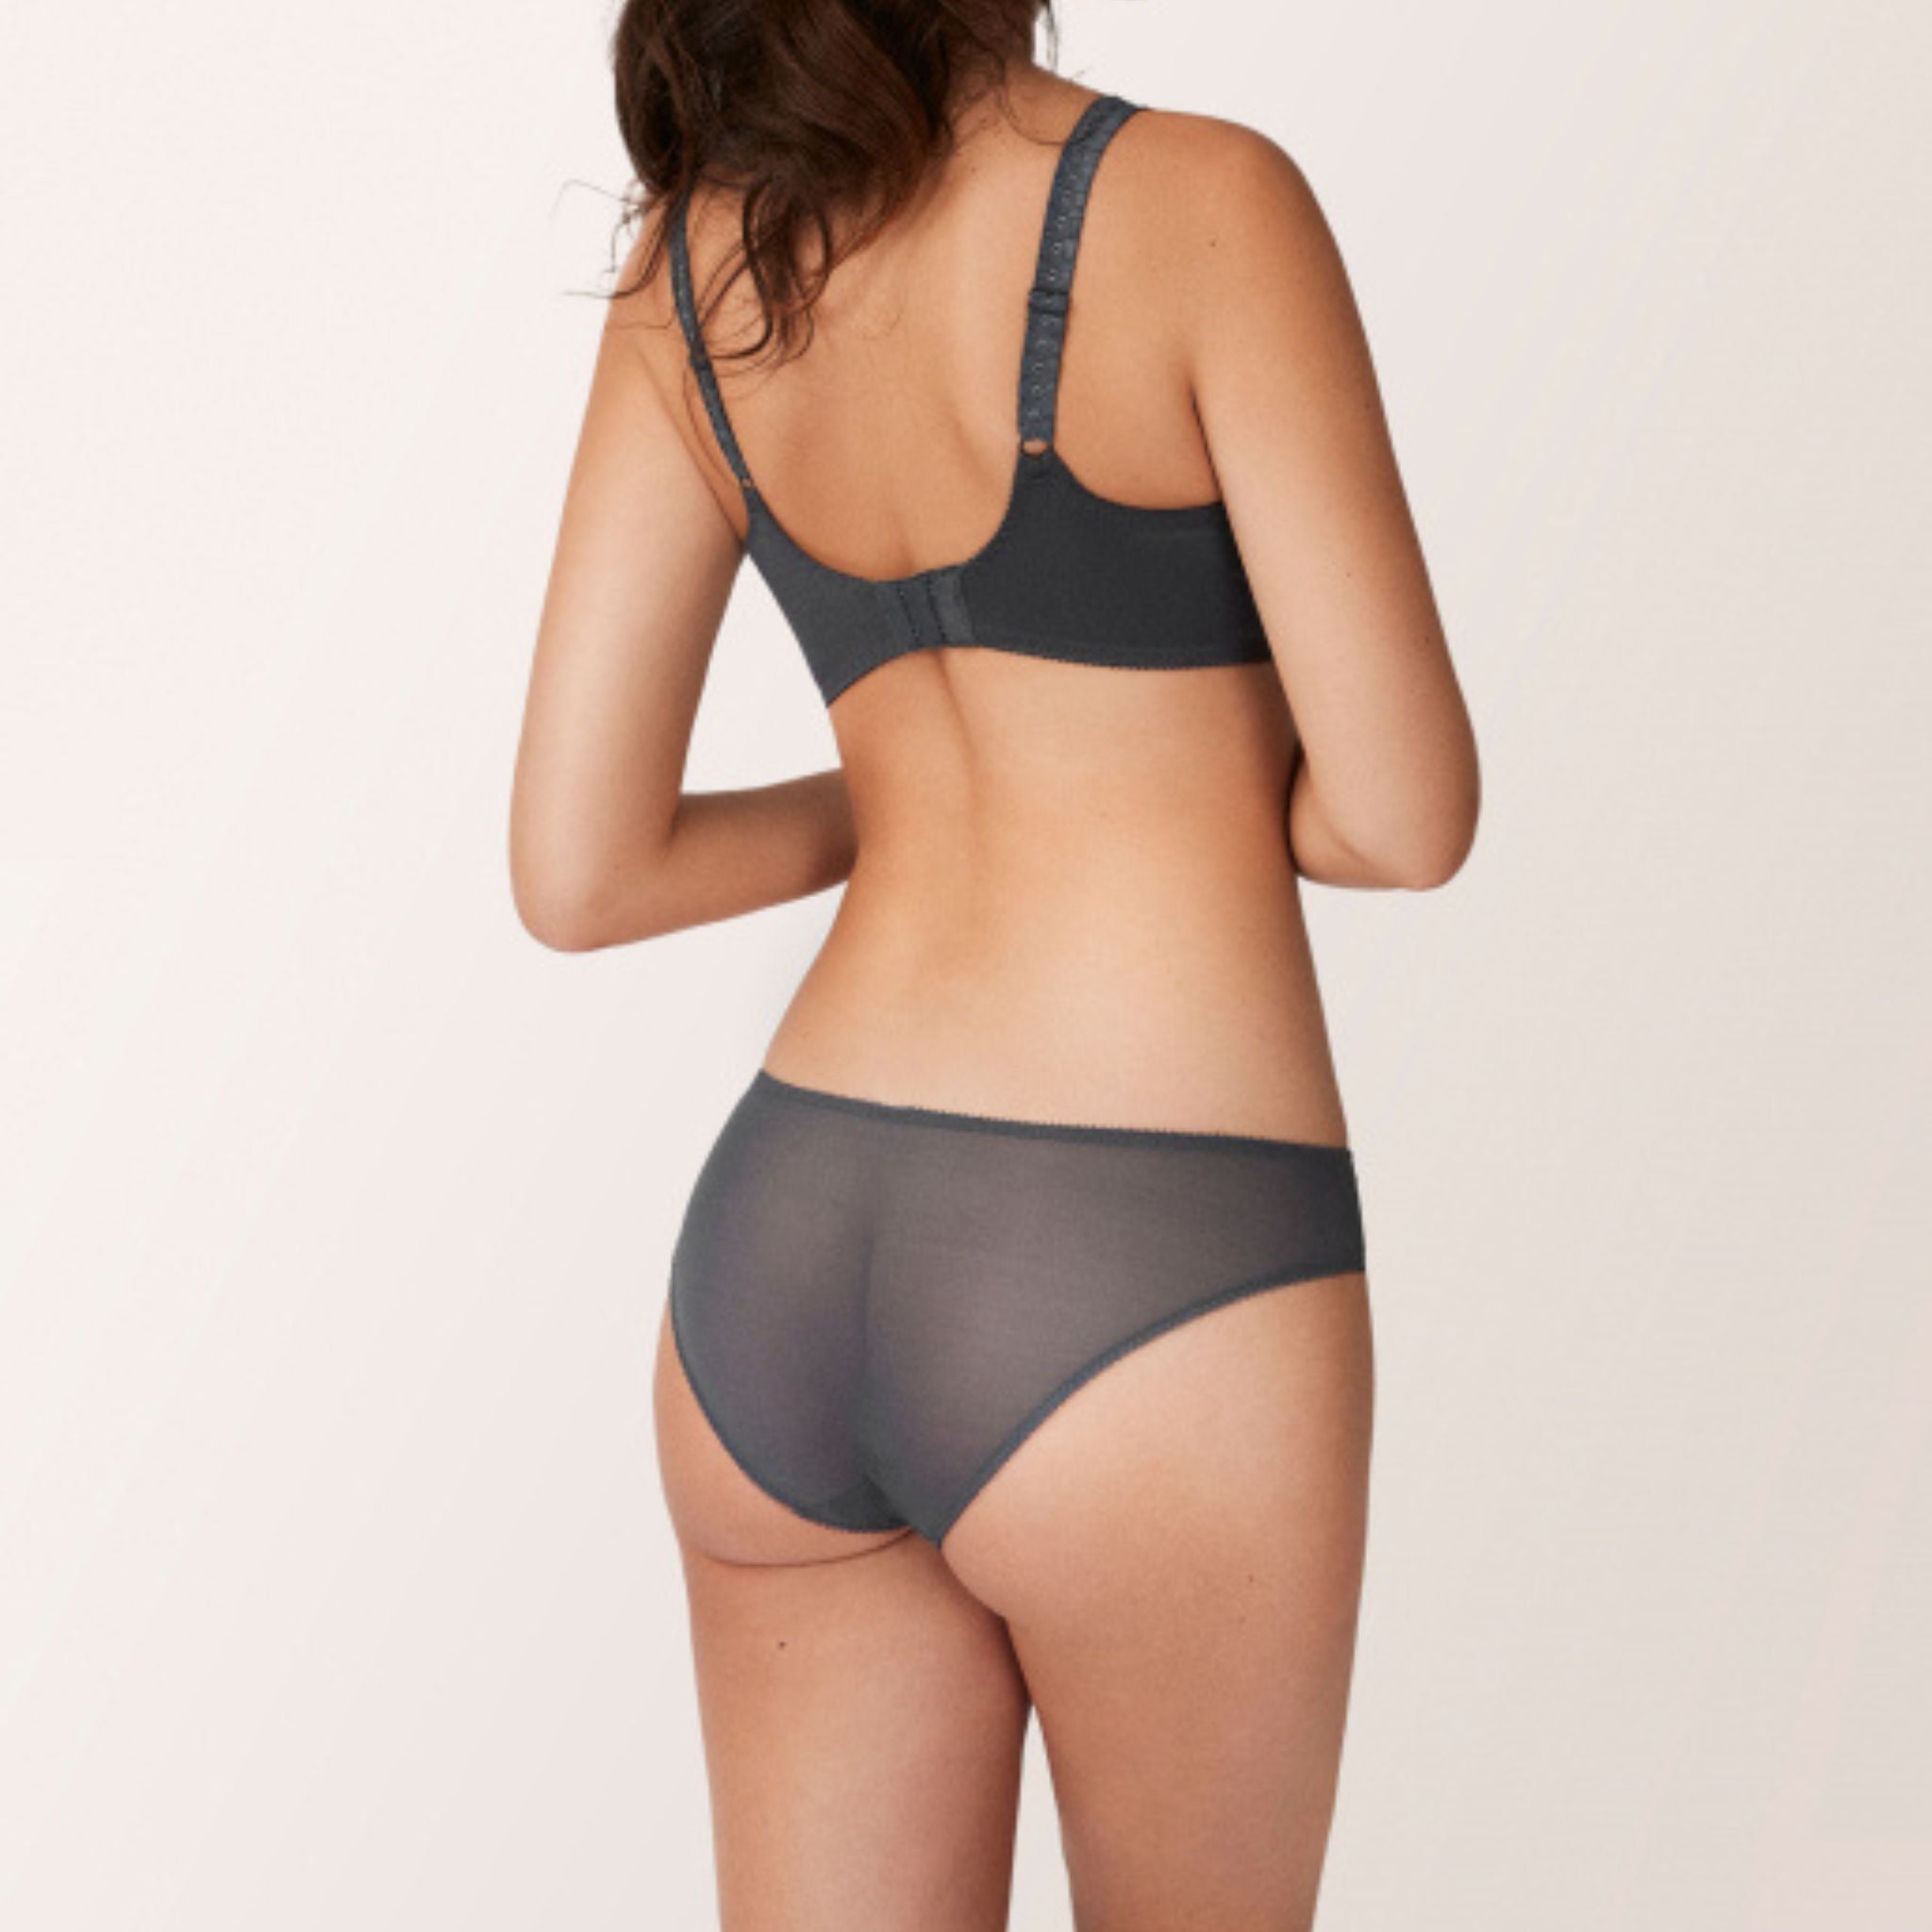 With their scooped leg, the Josephine bikini briefs in Charcoal grey are the collection’s most sensual item. Soft, lightweight tulle enhanced by floral embroidery and lurex details that provide the finishing touch.